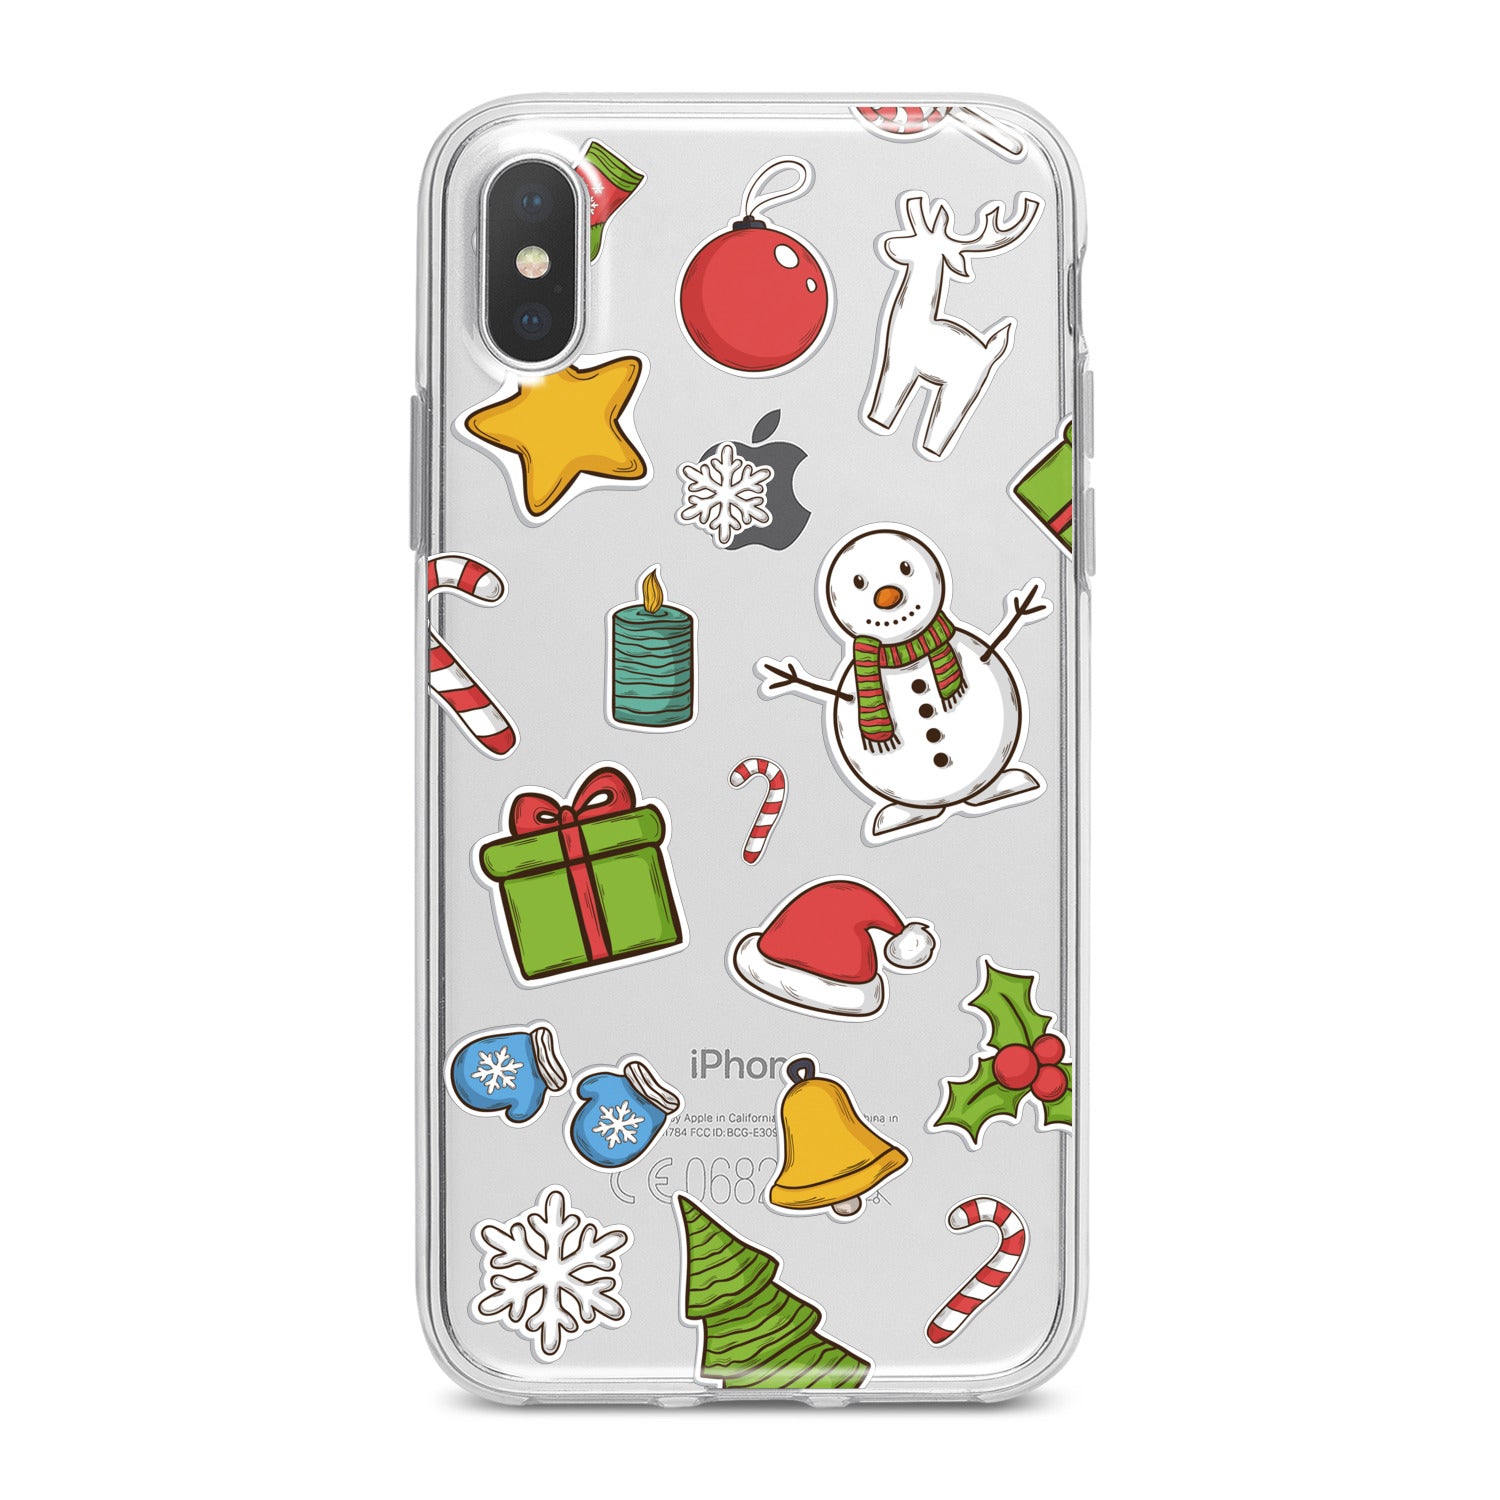 Lex Altern Winter Holidays Theme Phone Case for your iPhone & Android phone.